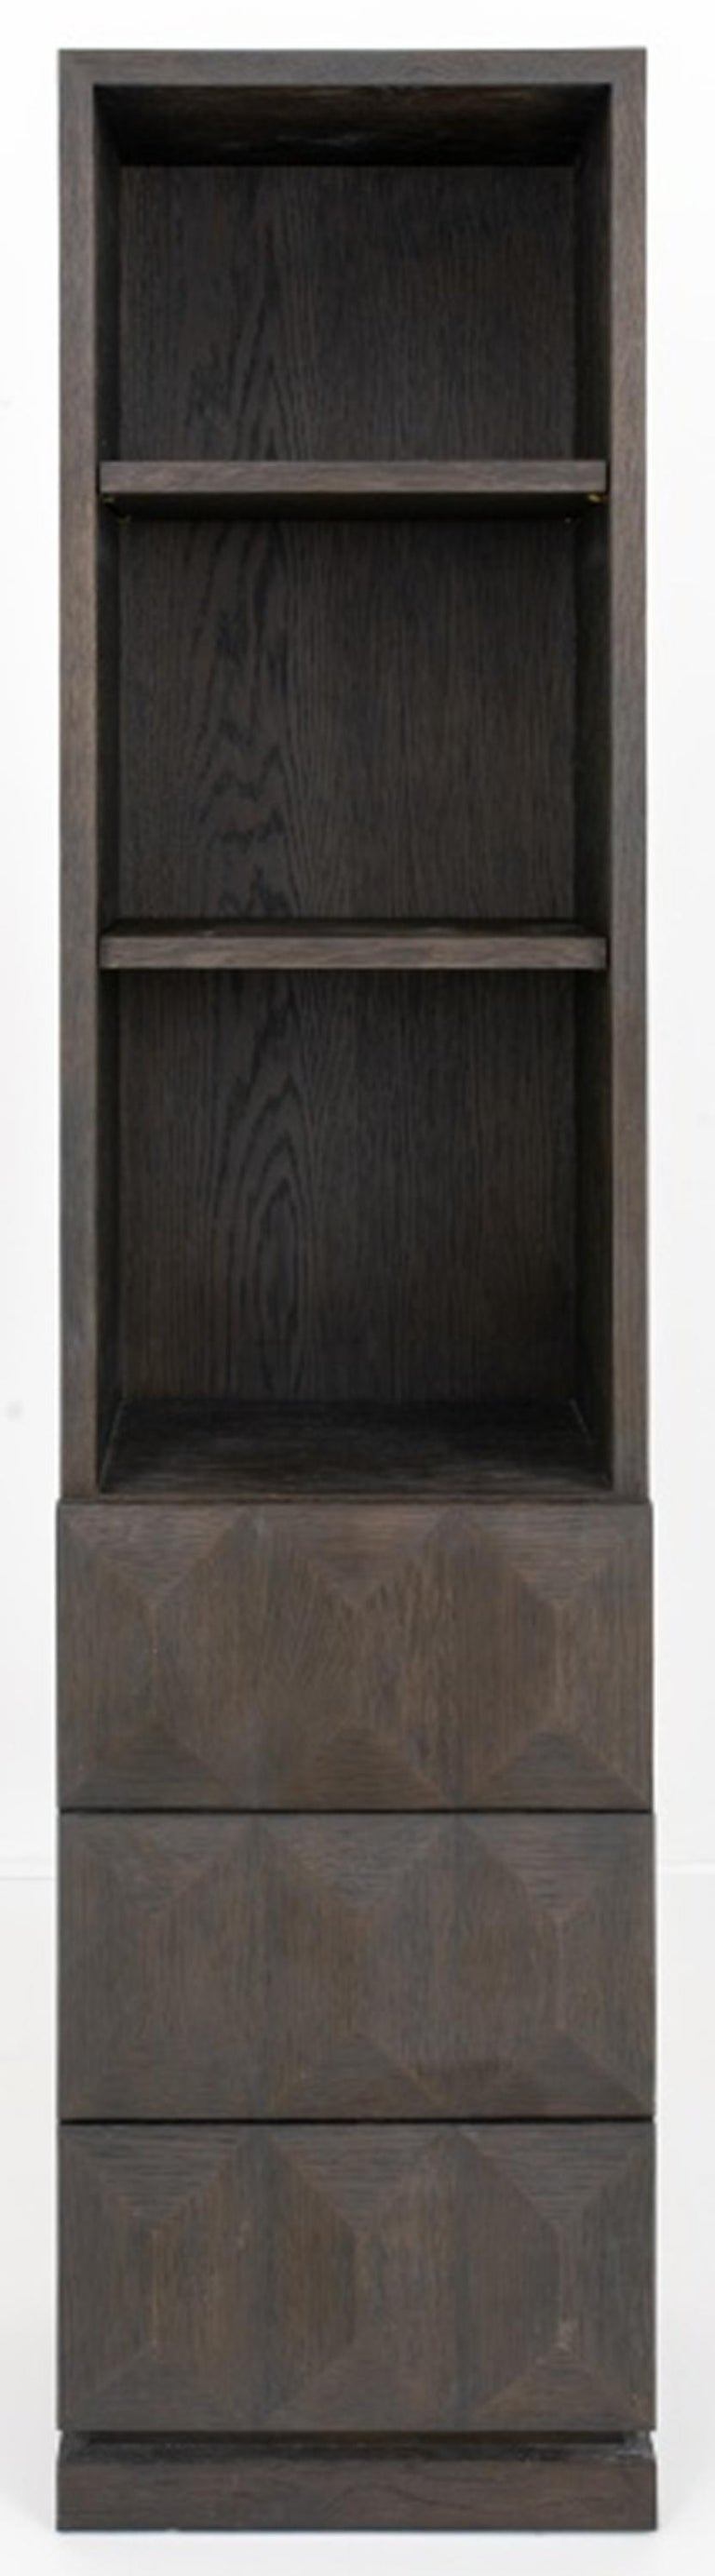 Richard Forwood RH 'Geometric' Bookcase For Sale at 1stDibs